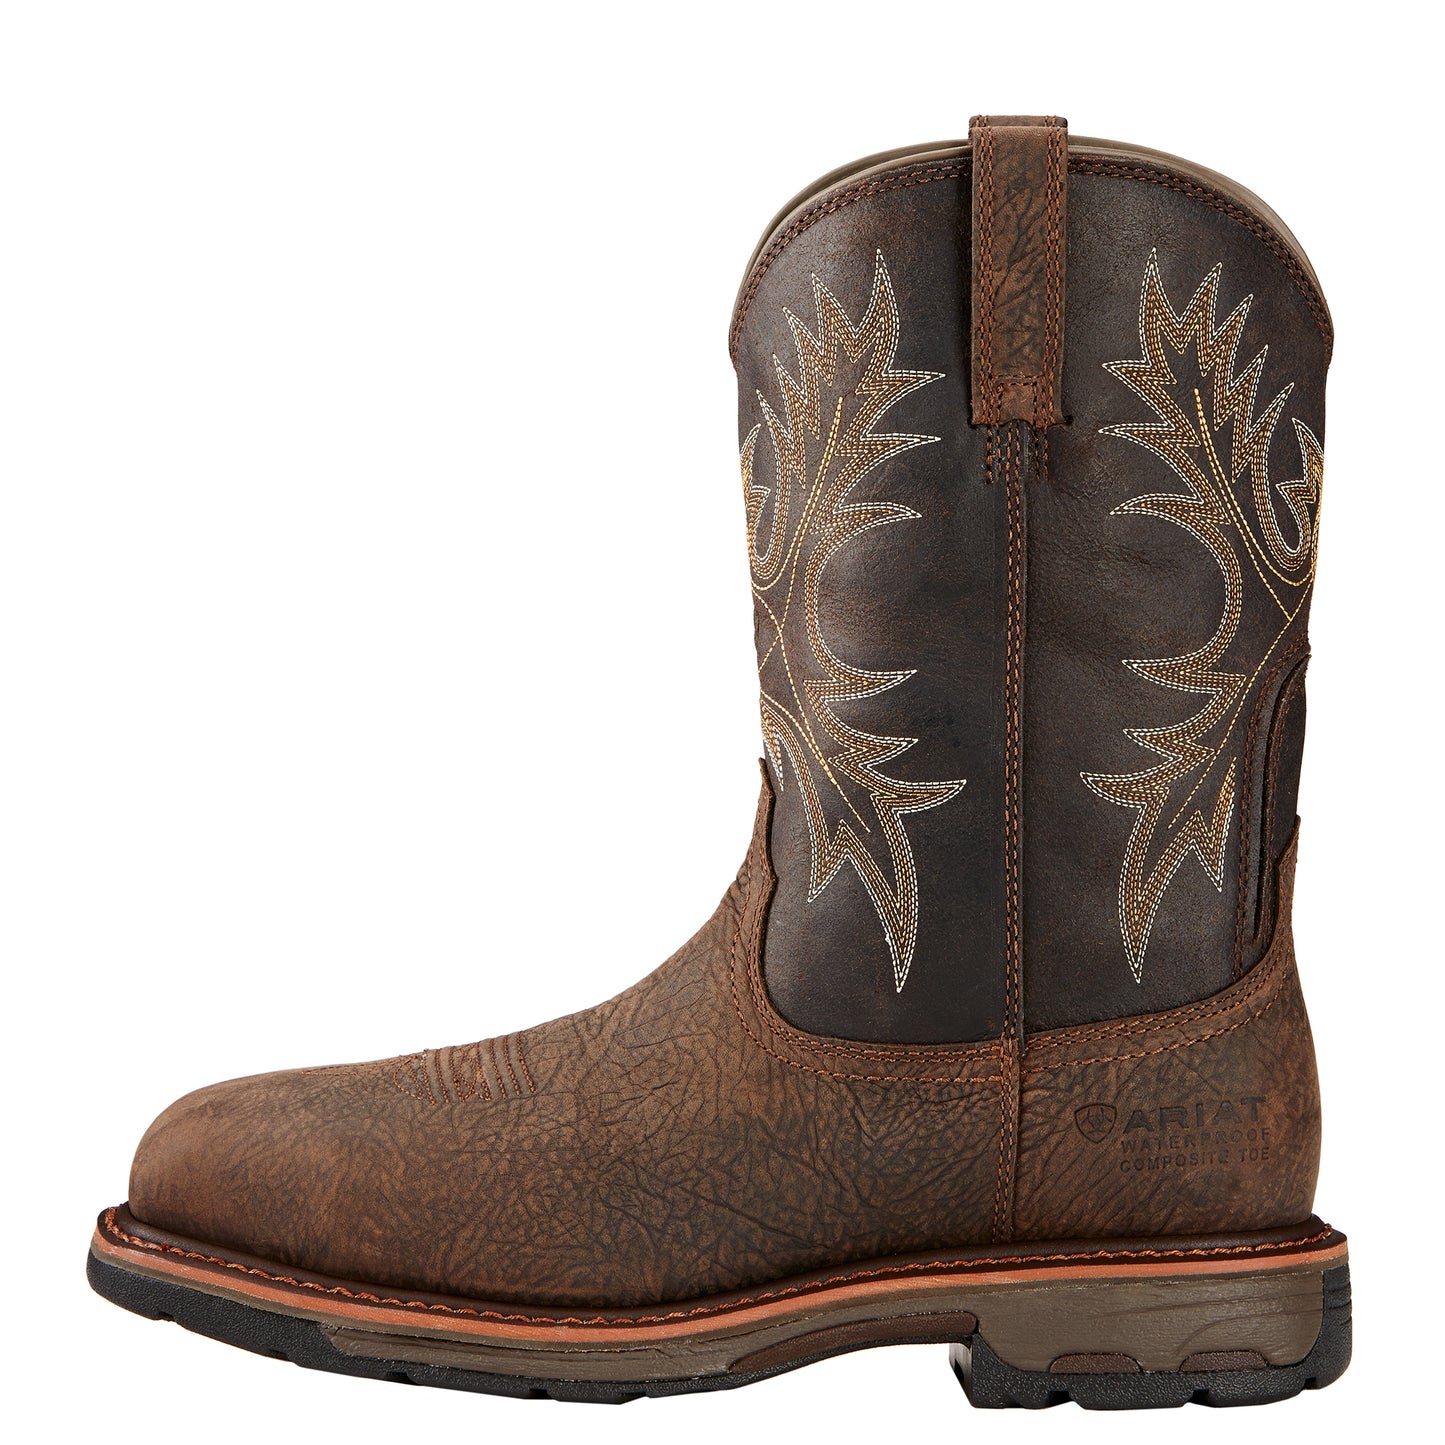 Ariat Men's Workhog Wide Square Toe Comp Toe Water Proof #10017420